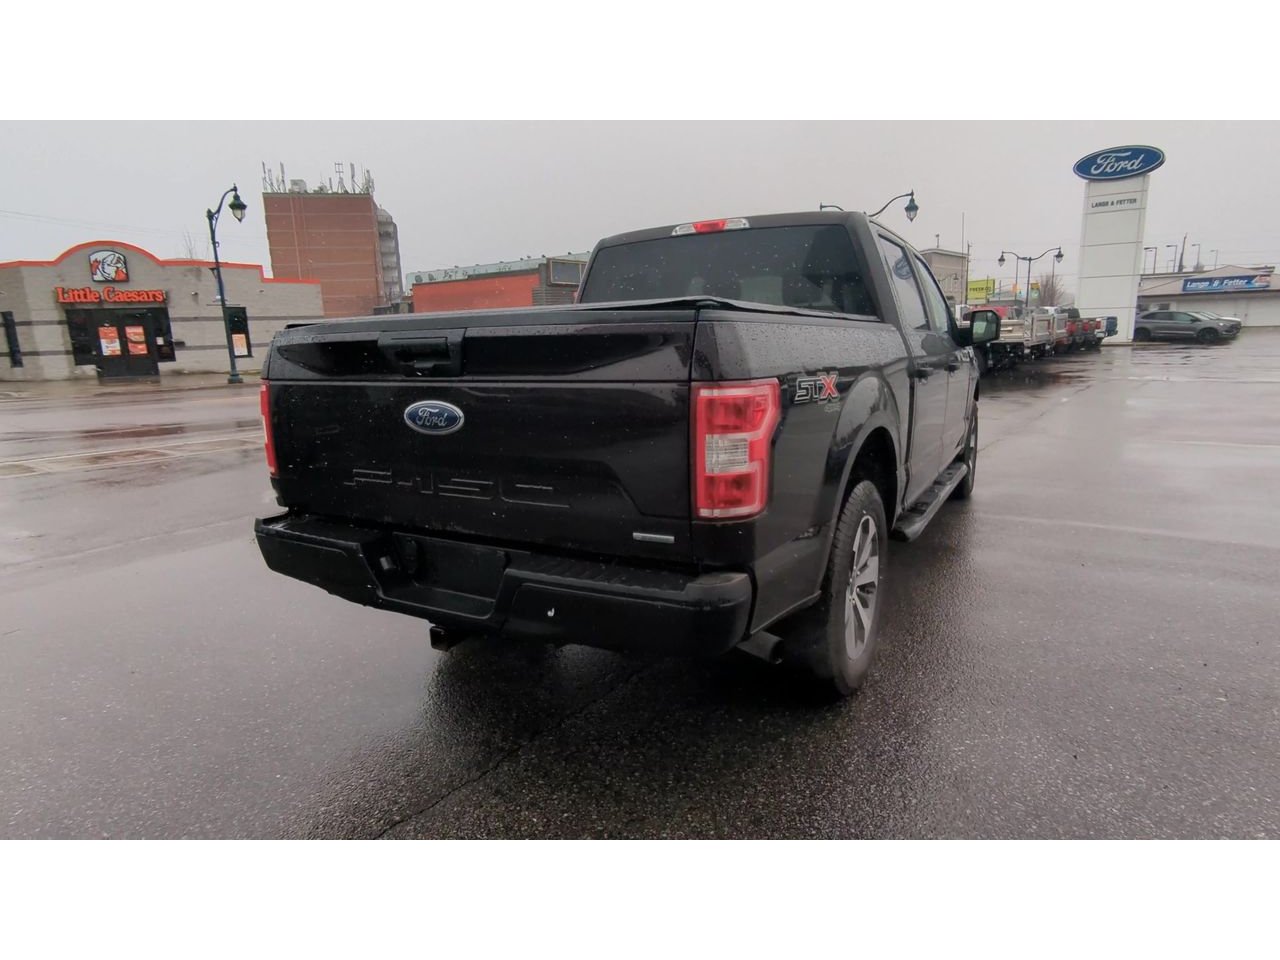 2020 Ford F-150 - 21807A Full Image 8